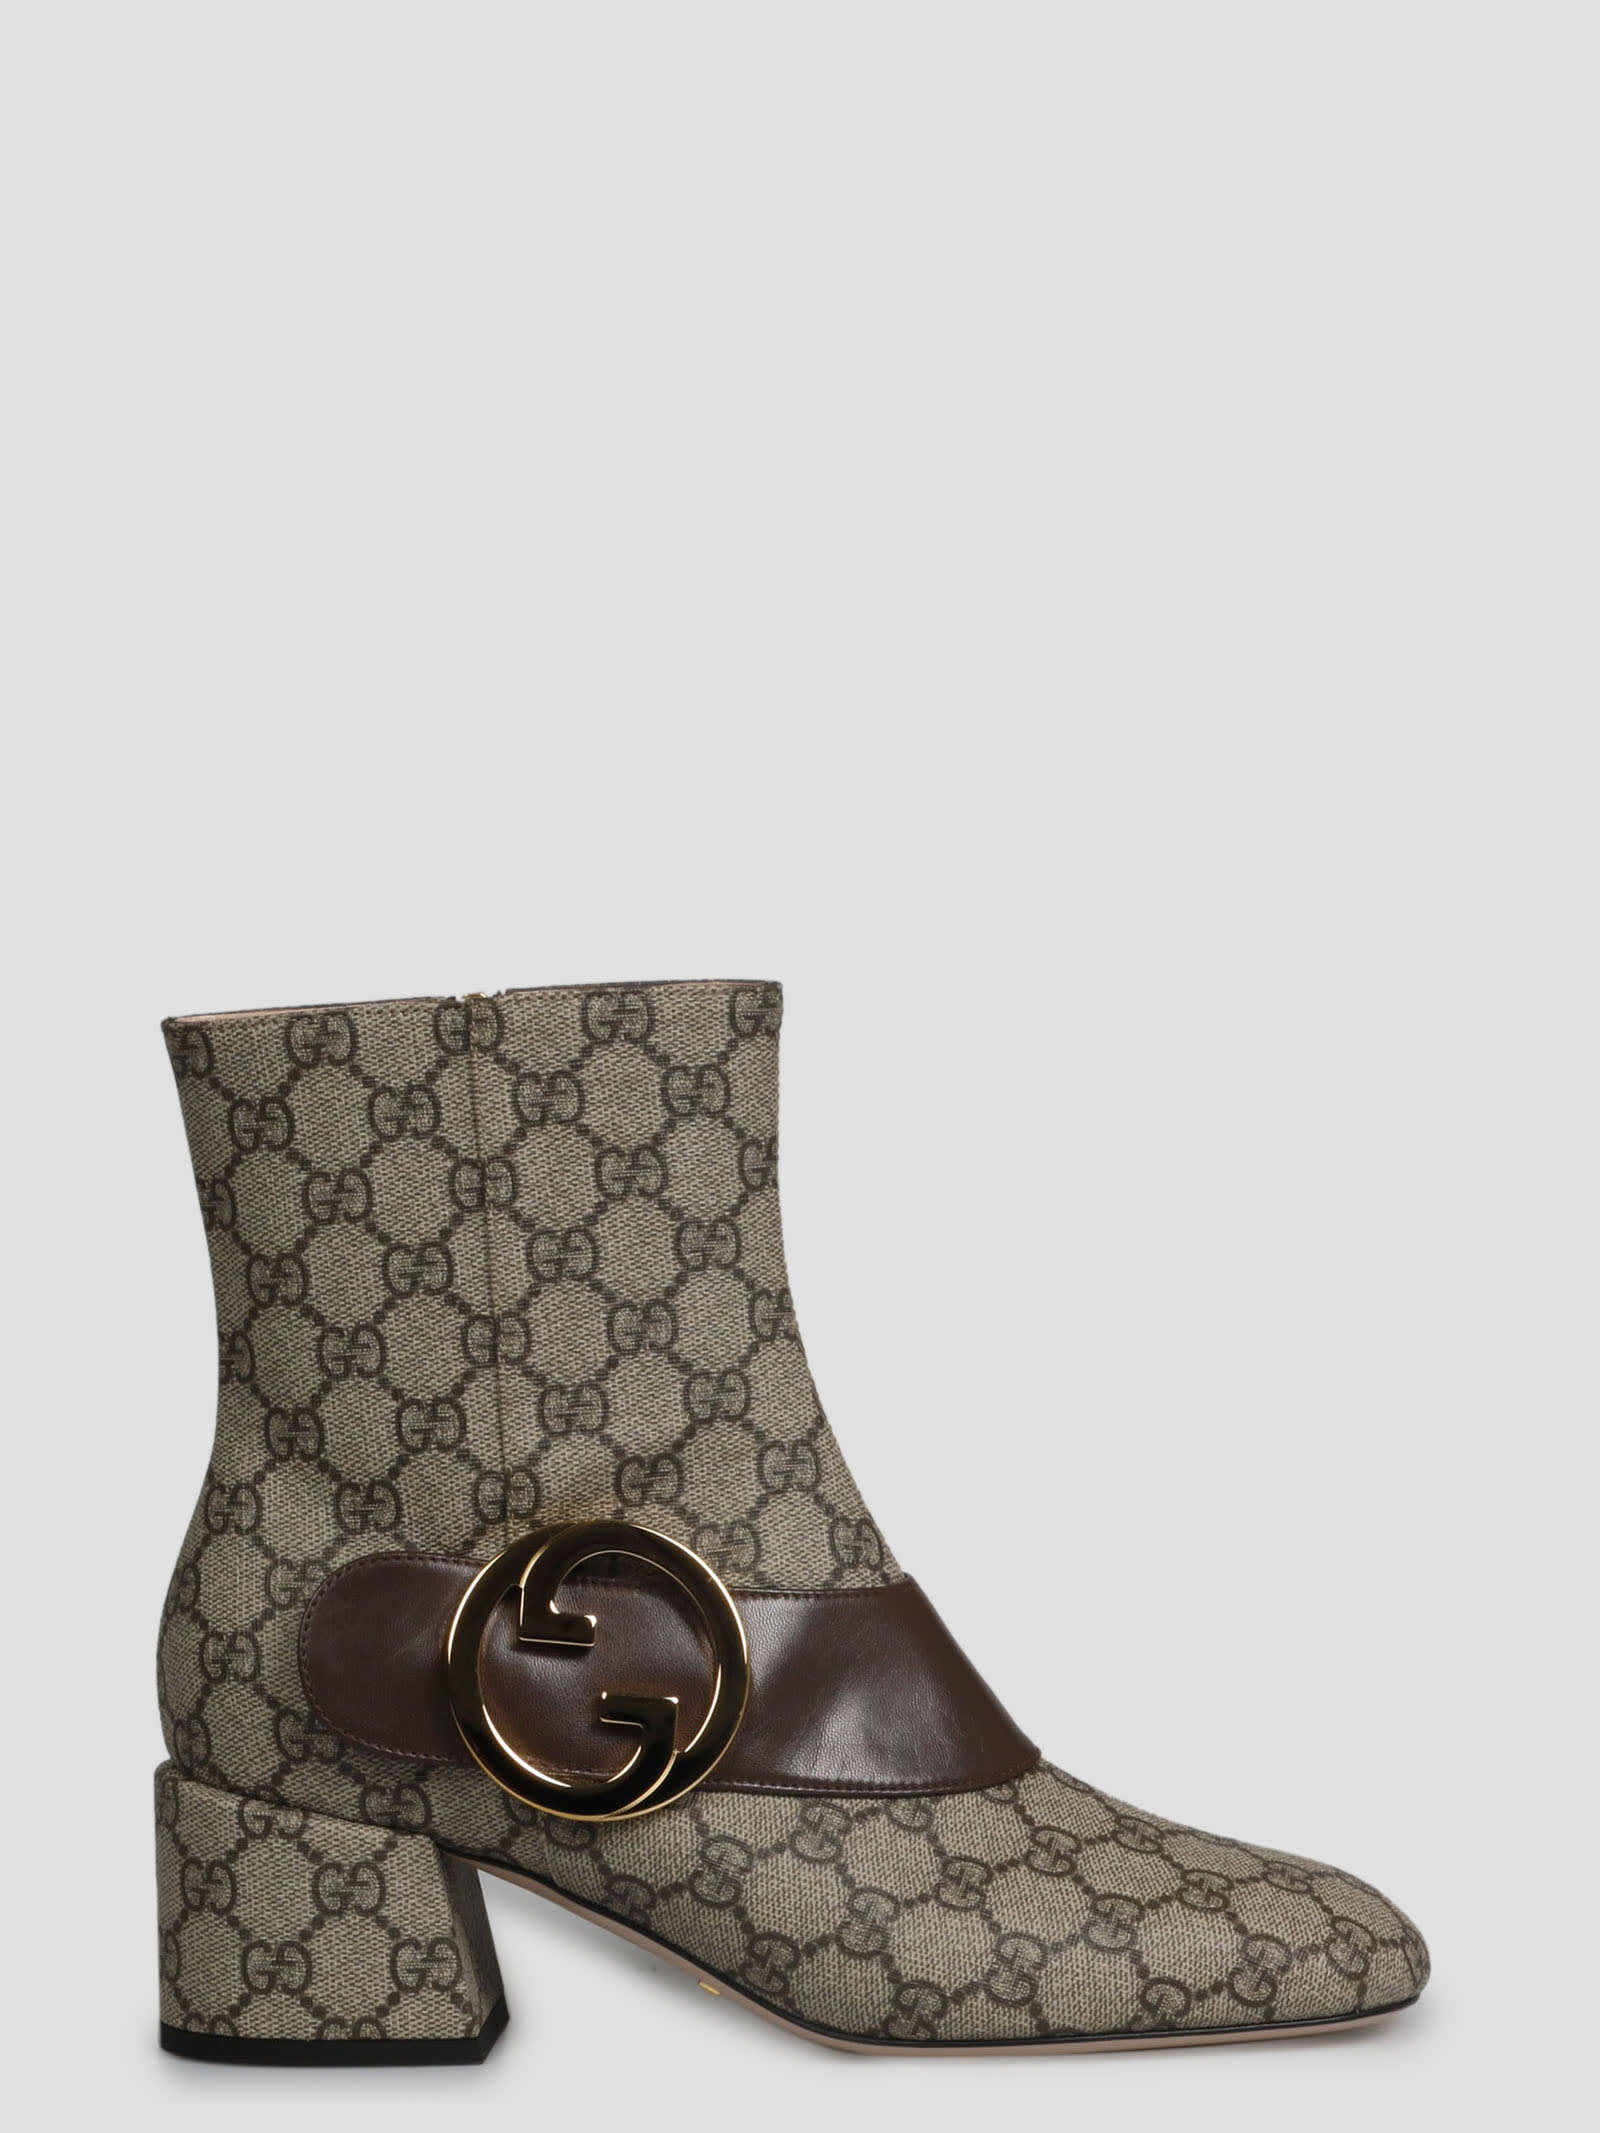 Gucci Blondie Ankle Boots